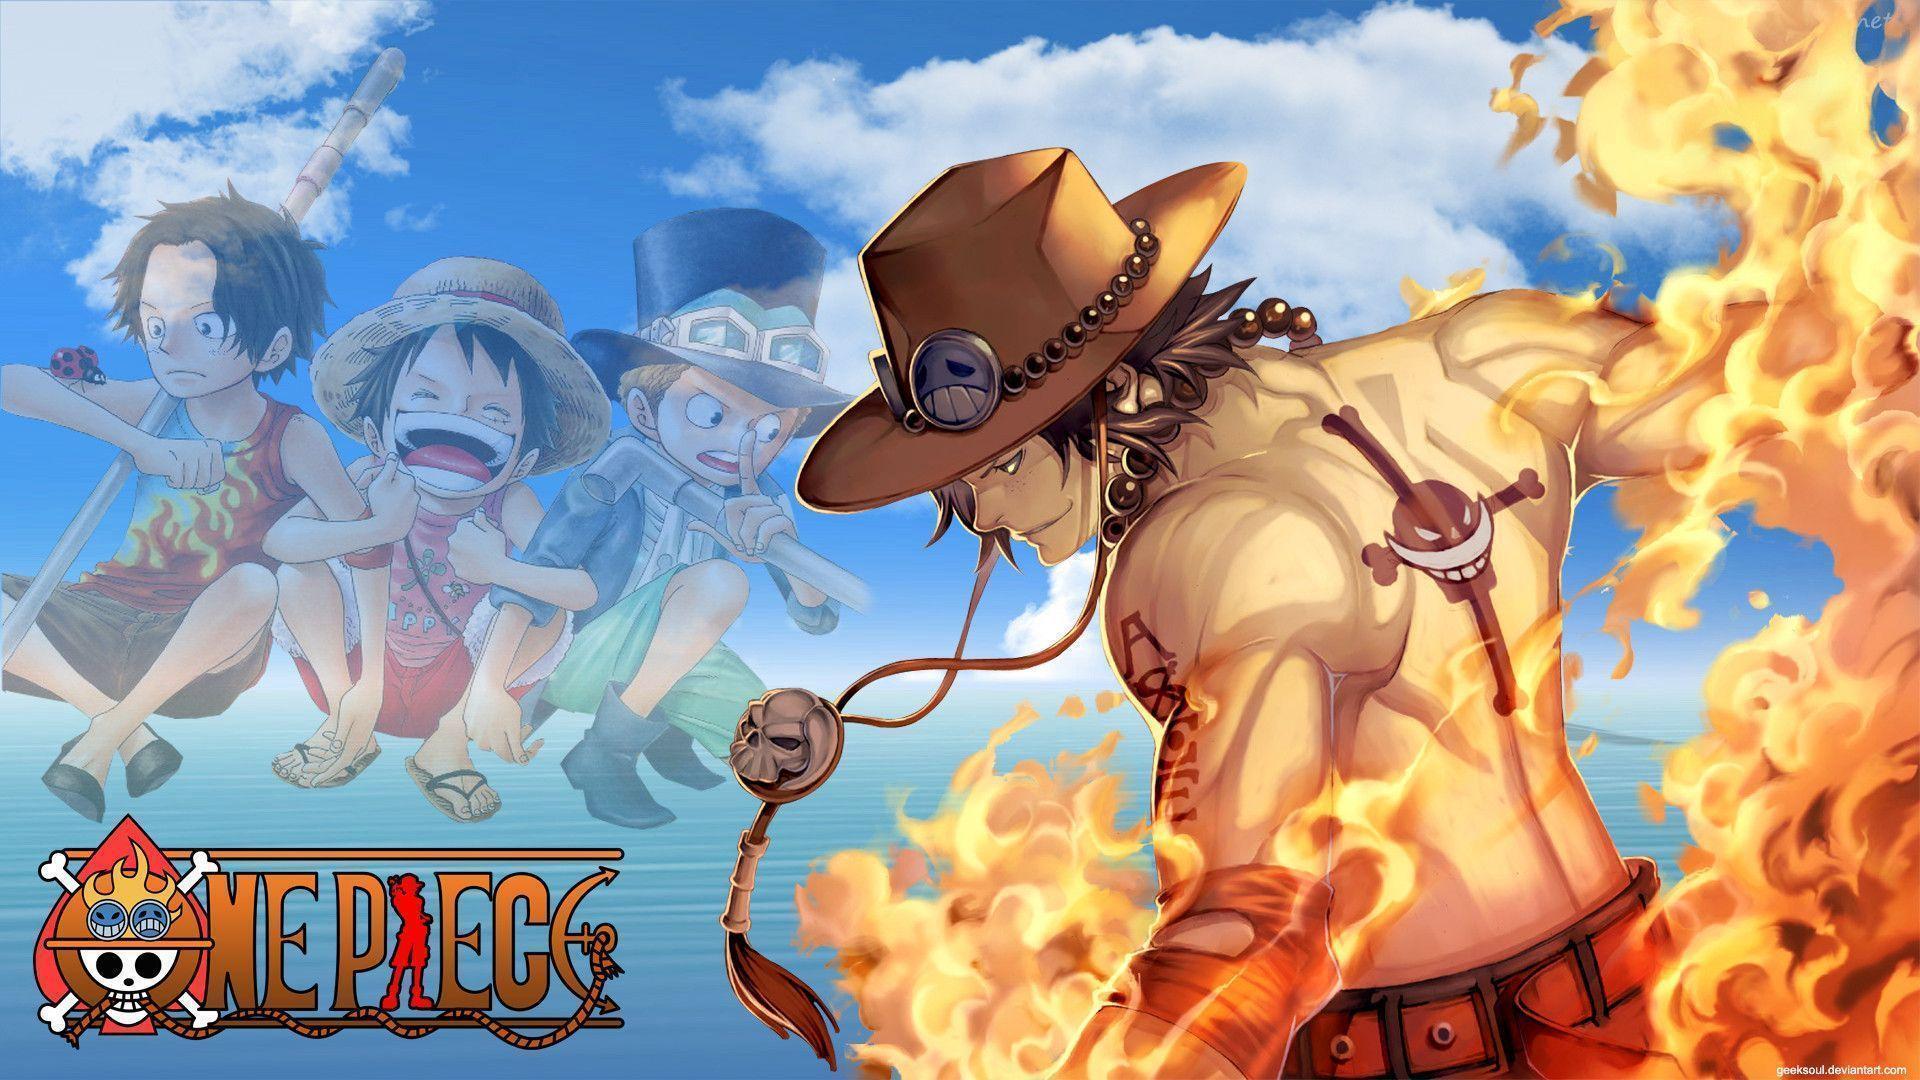 1920 x 1080 · jpeg - One Piece Ace Wallpapers - Wallpaper Cave